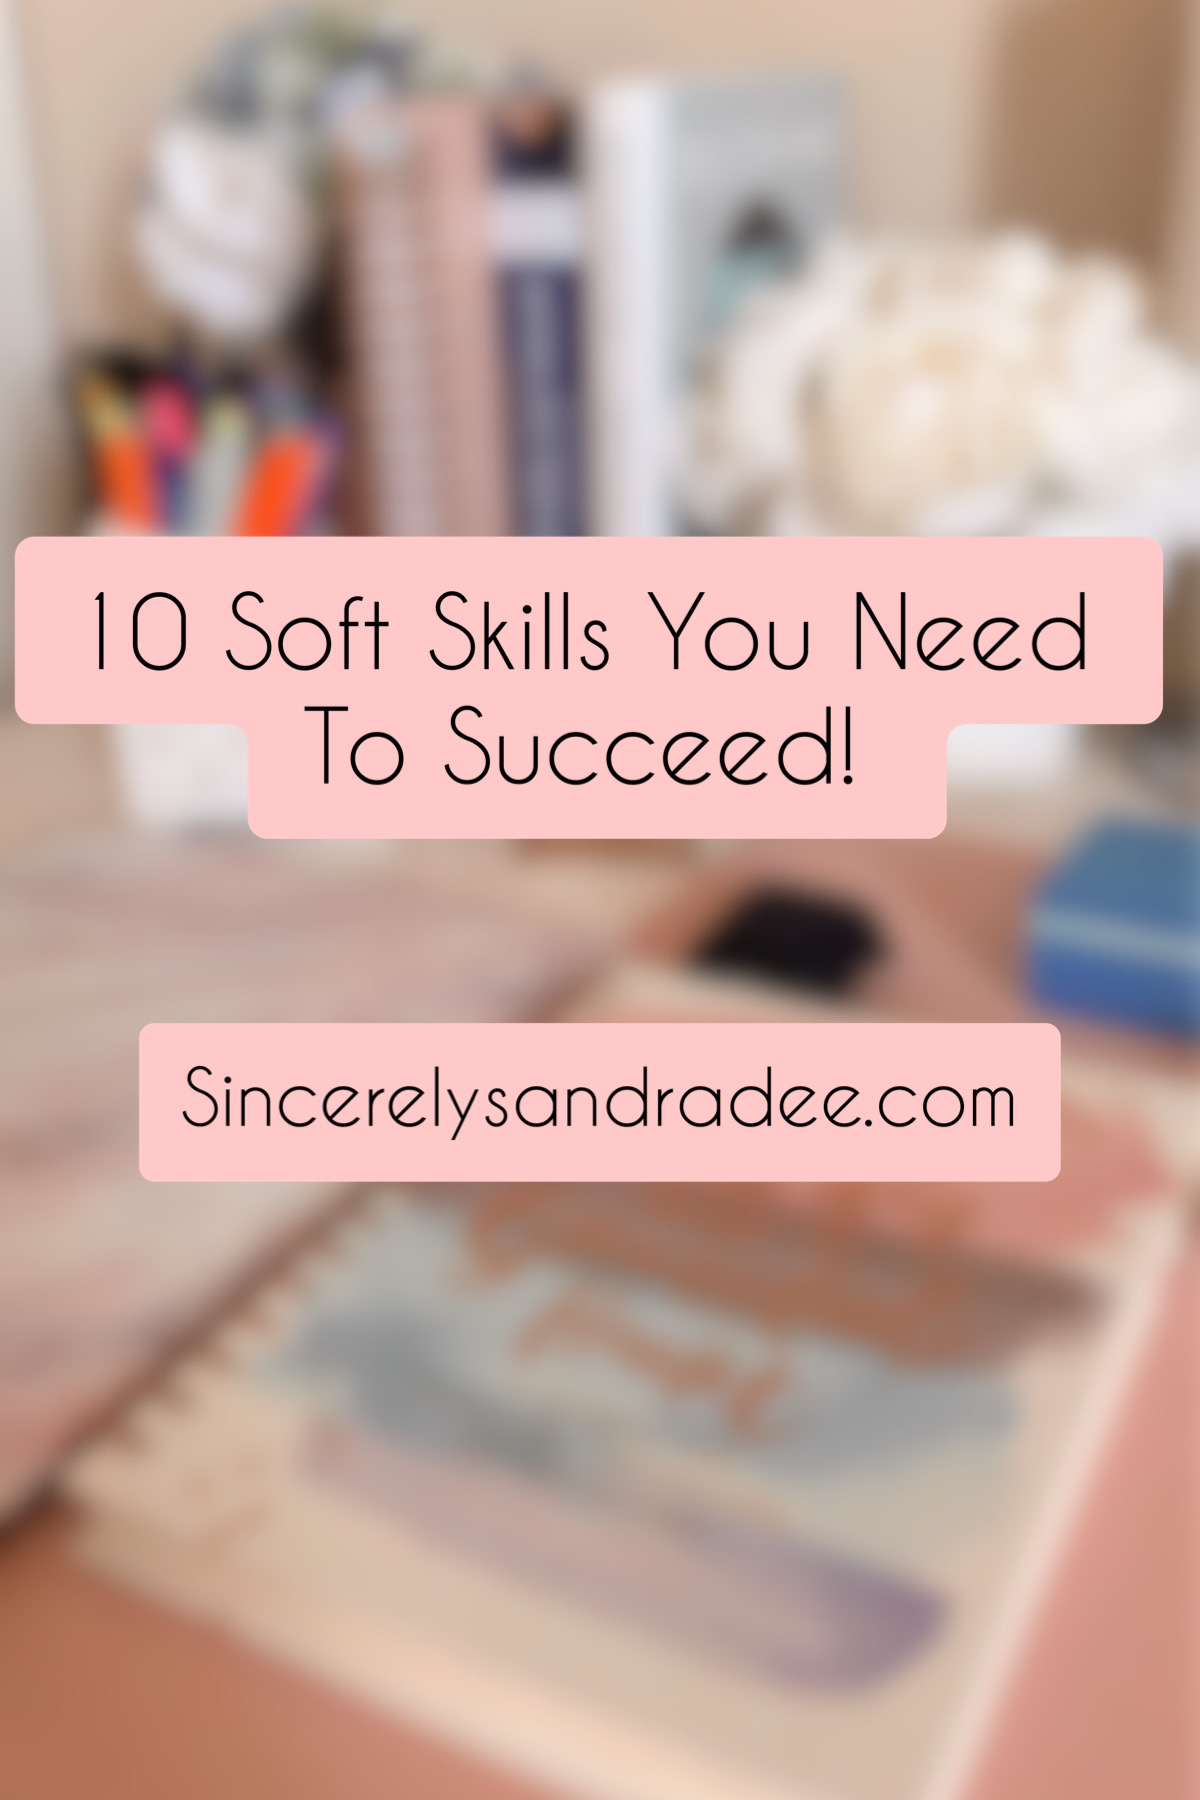 10 Soft Skills You Need To Succeed